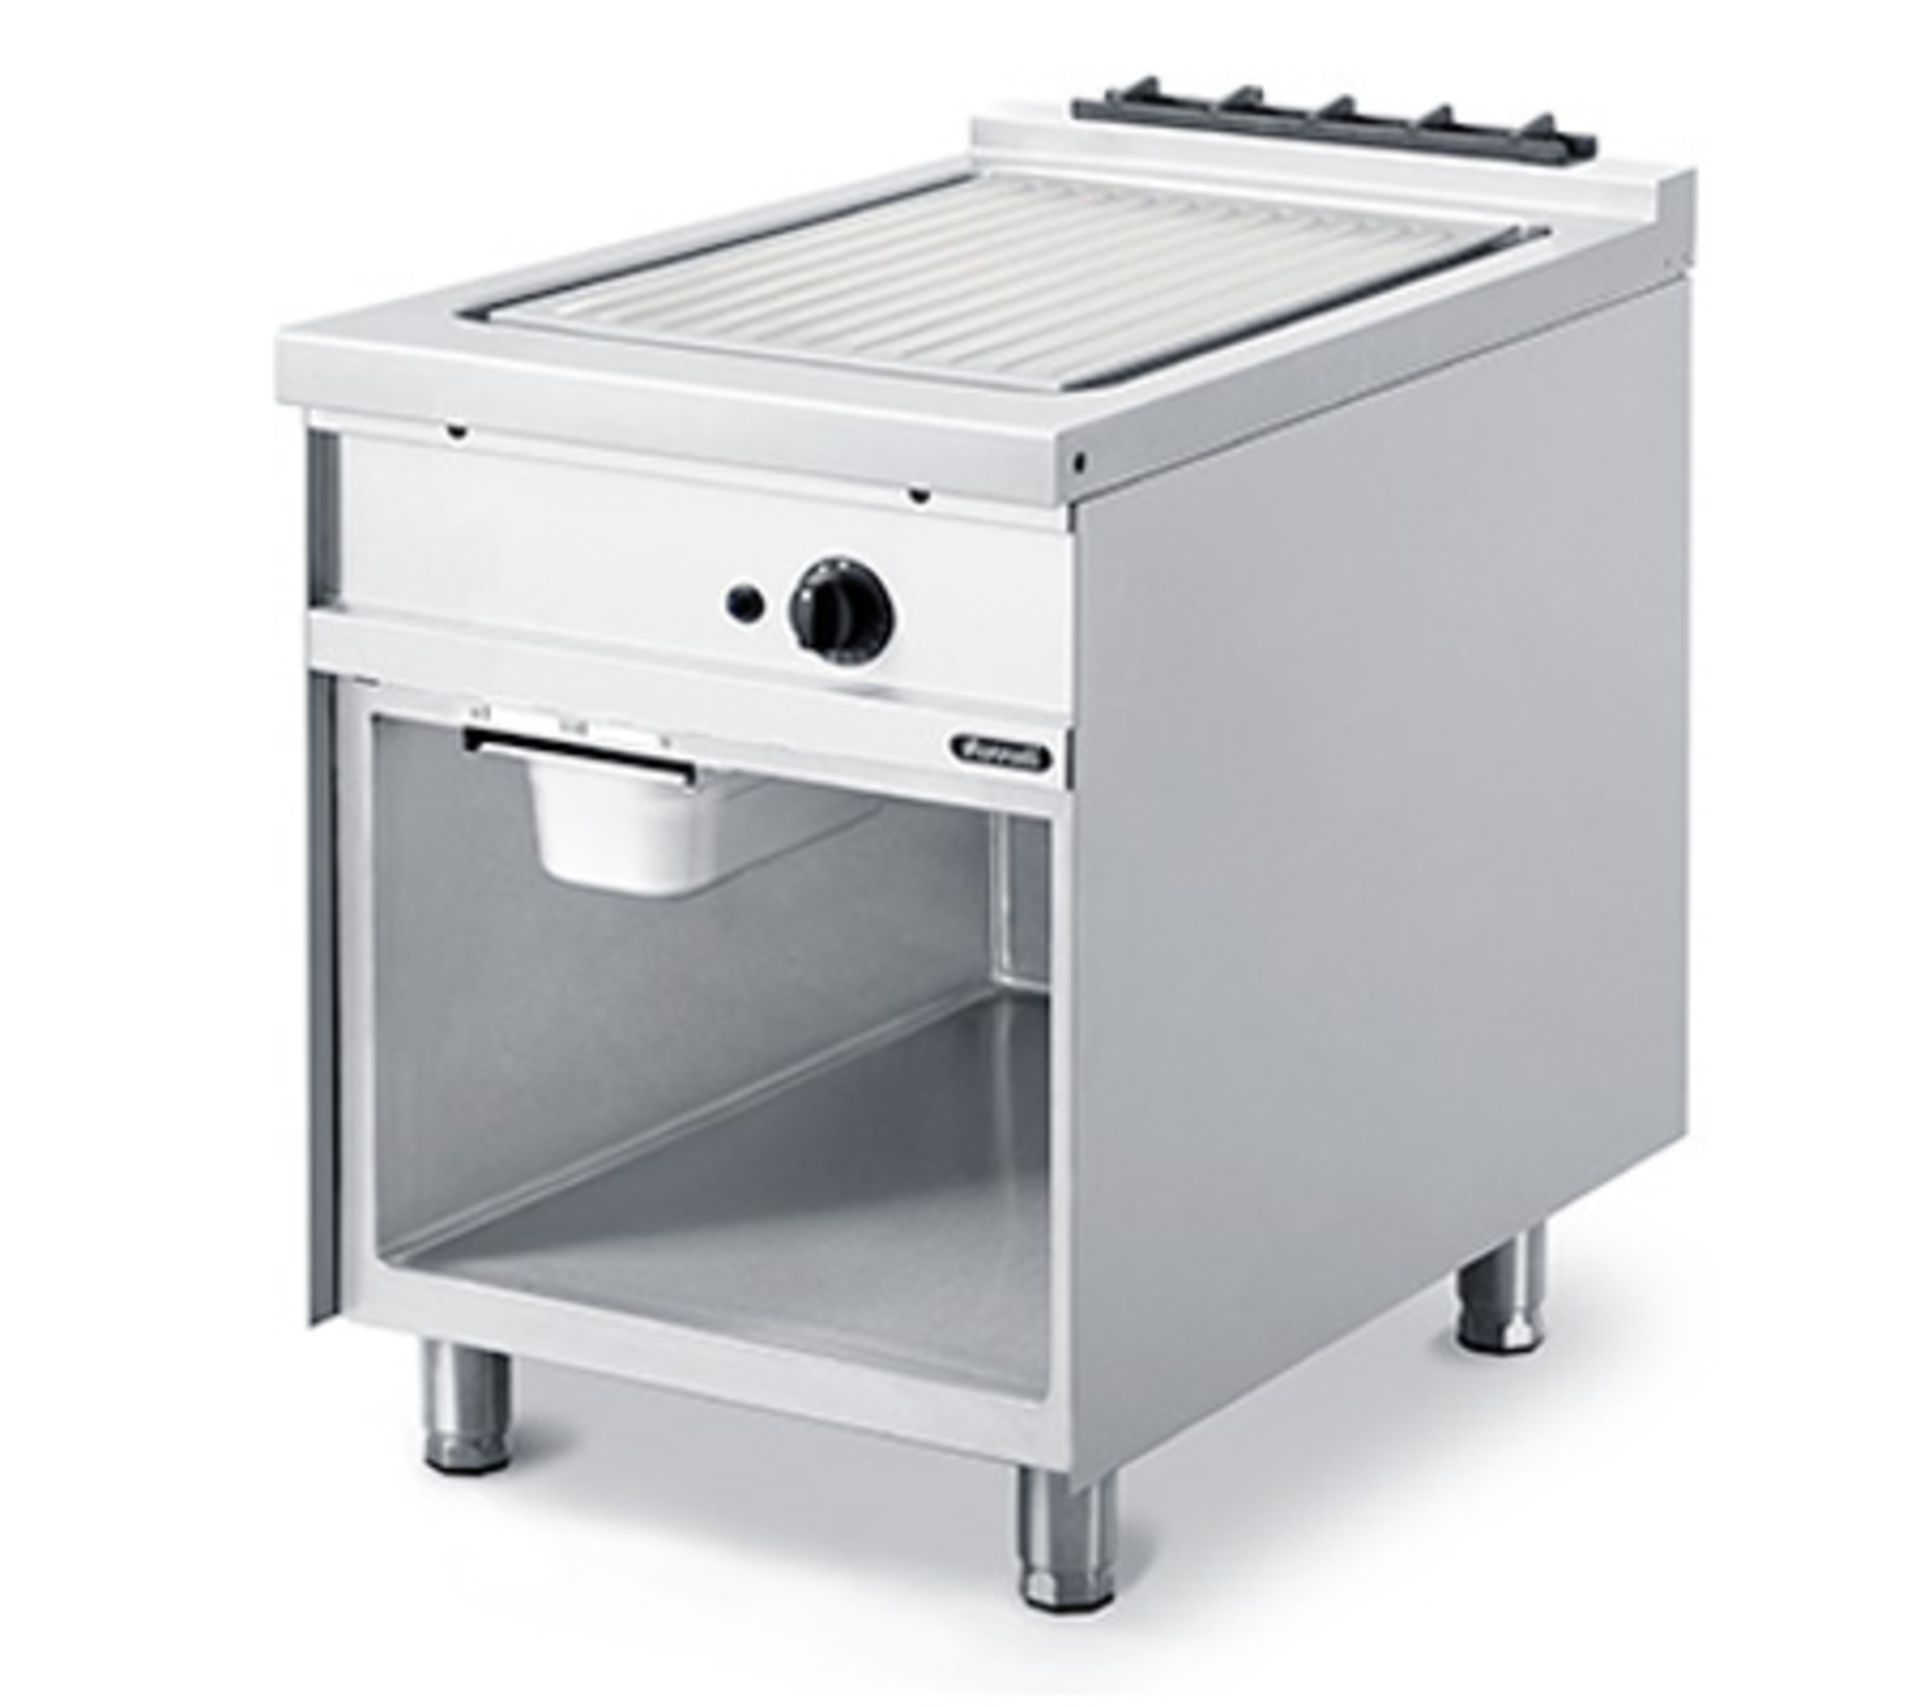 *Grandis 900 Fry Top, gas, stand-alone or suite, 600mm W x 900mm D, manual controls, 16mm thick smoo